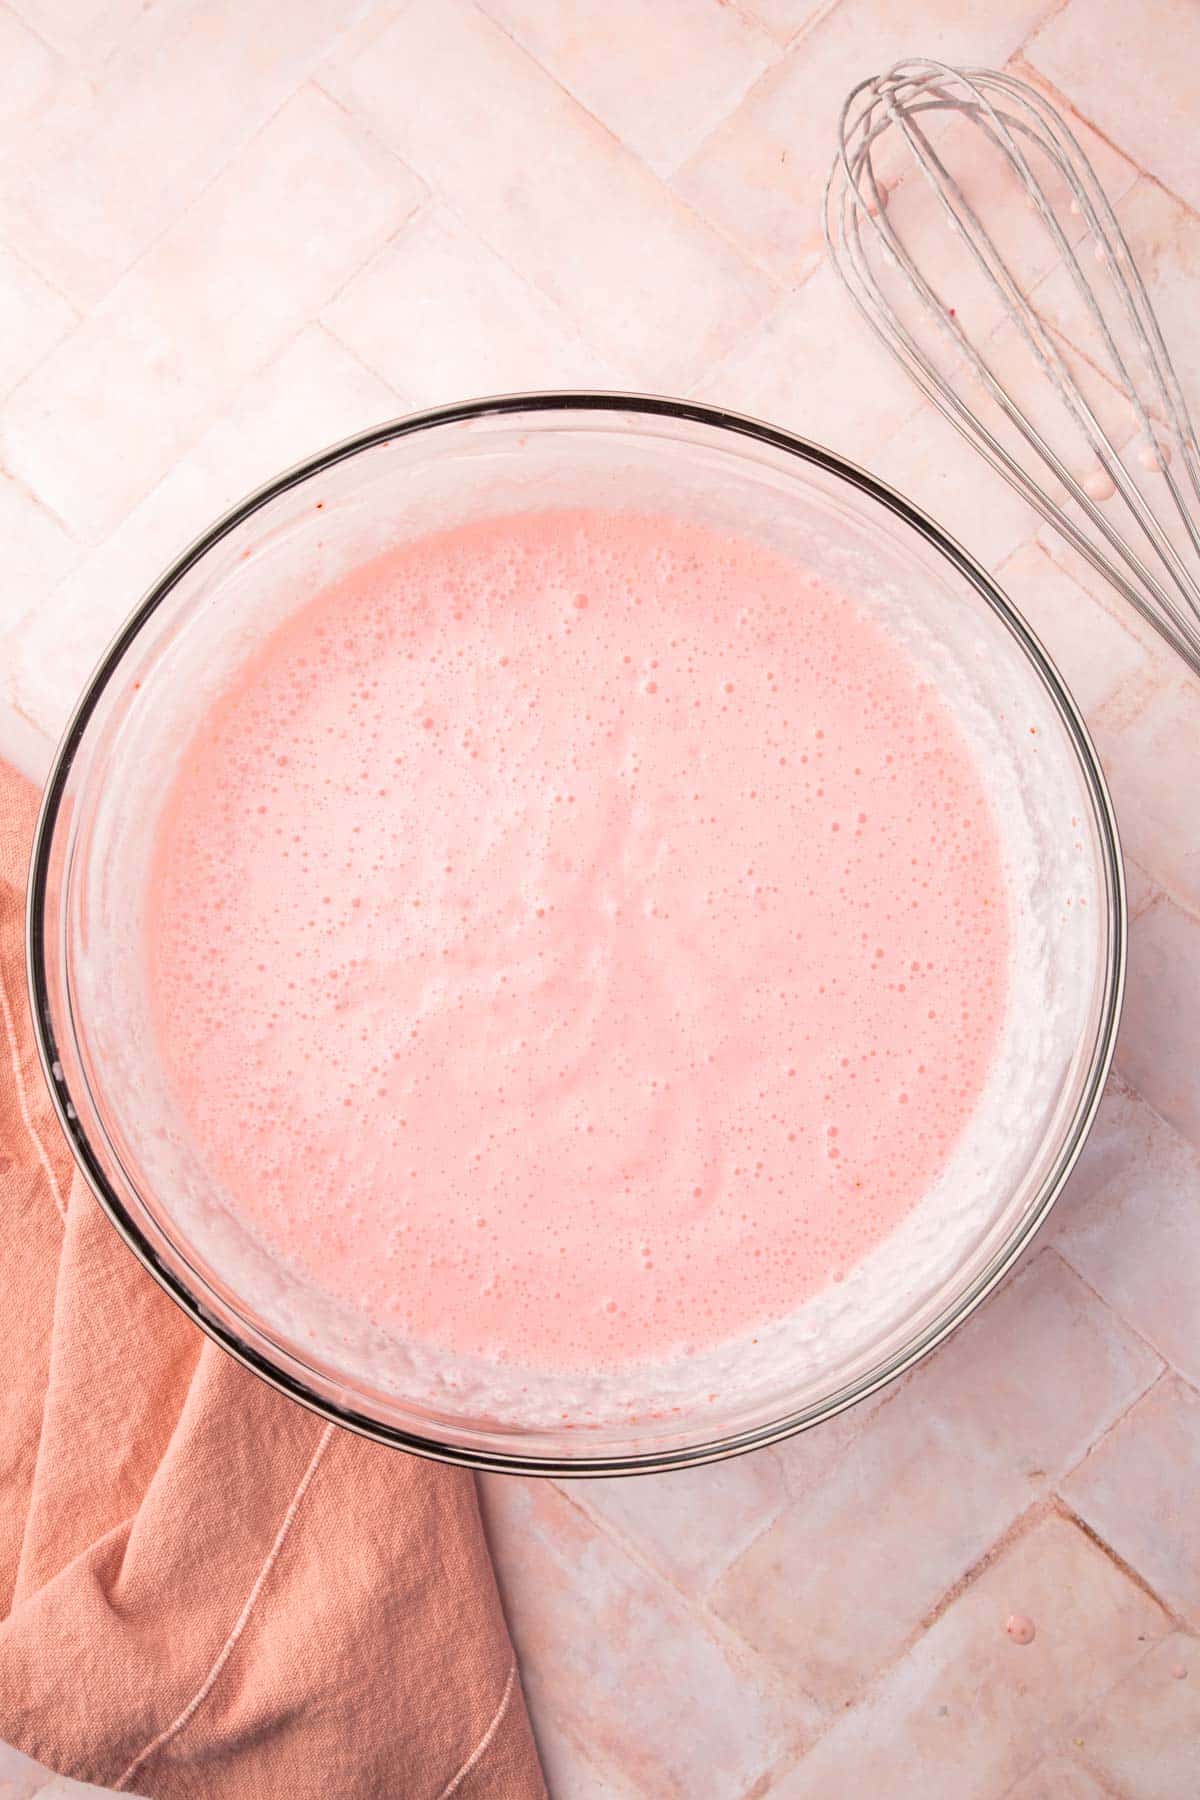 A glass bowl of strawberry ice cream base before churning.